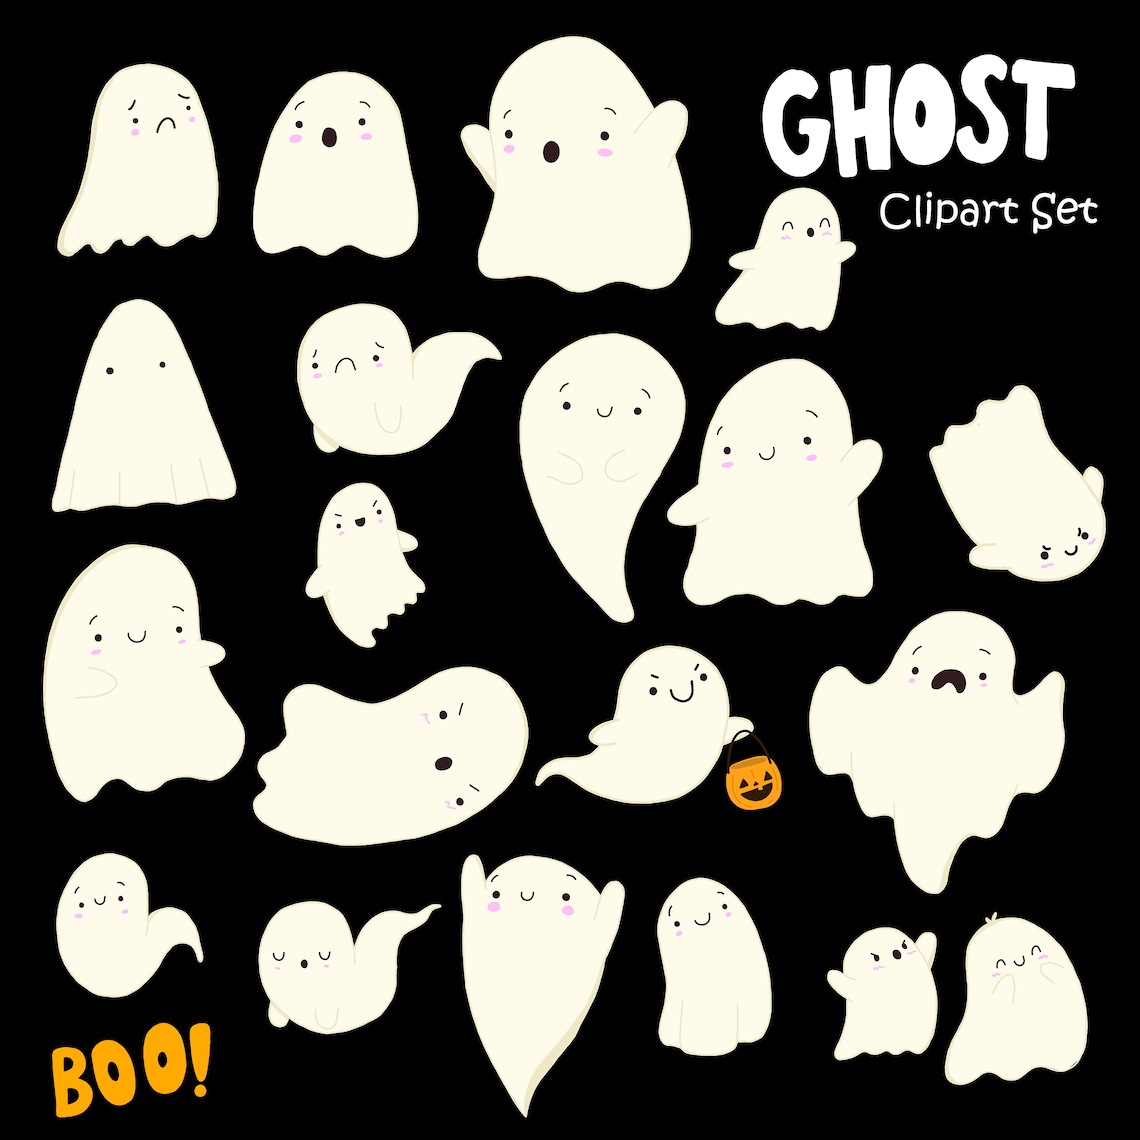 Ghost Vector Clipart Set 20 Halloween Ghost Clipart Set - Etsy